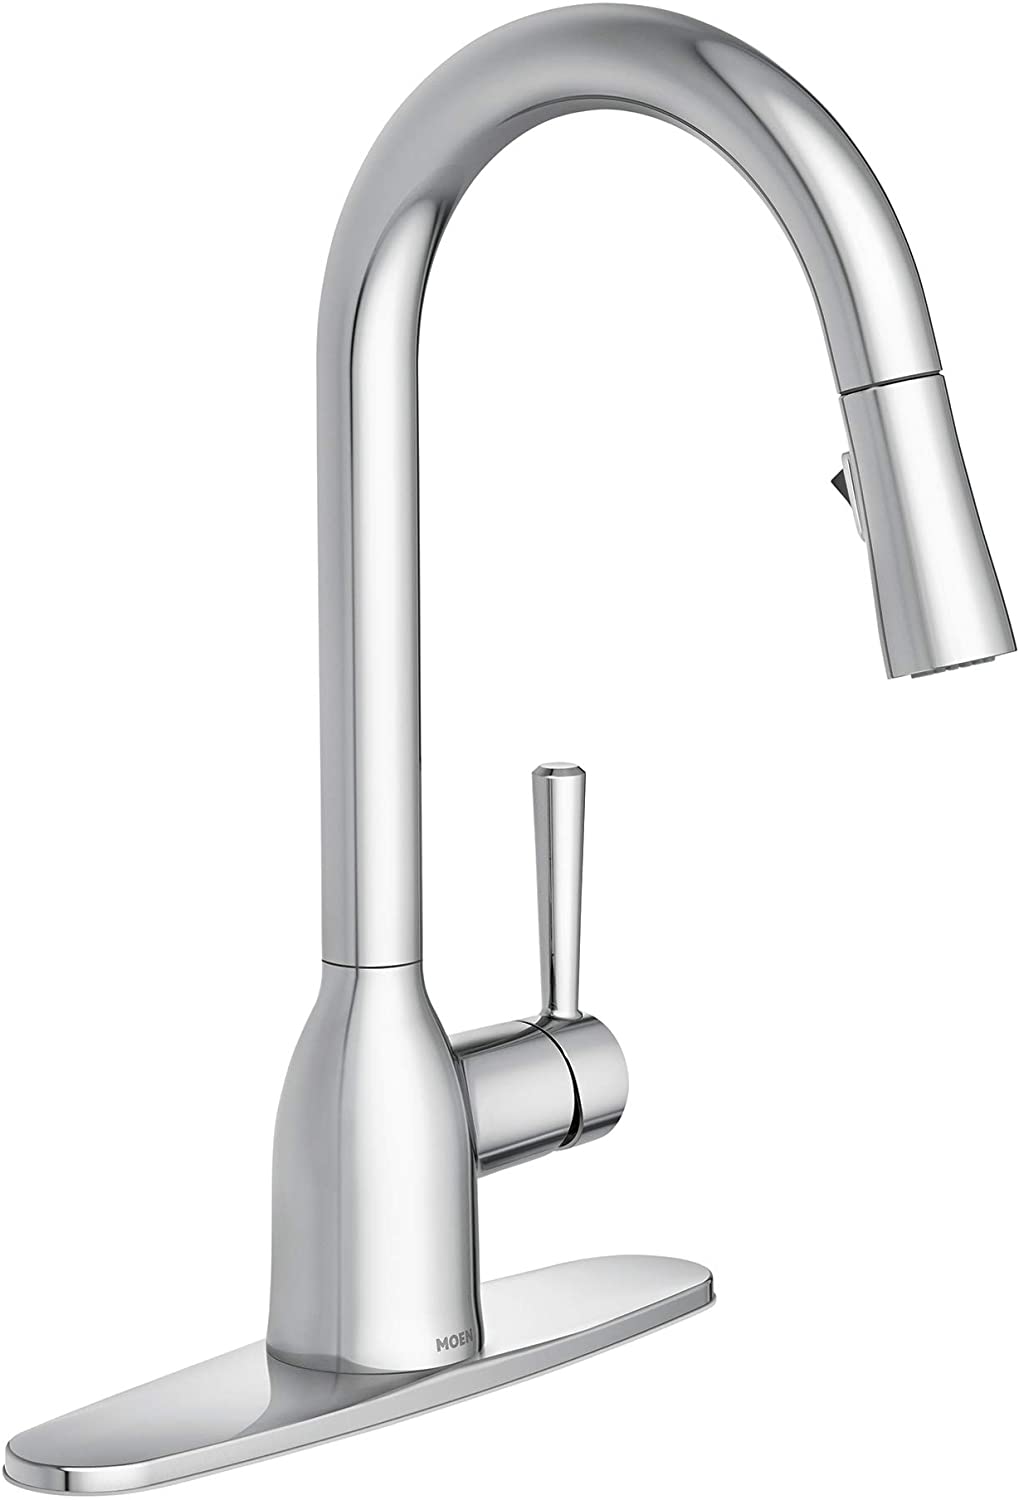 Moen Adler One-Handle High Arc Pulldown Kitchen Faucet with Power Clean (Chrome) $82.80 + Free Shipping